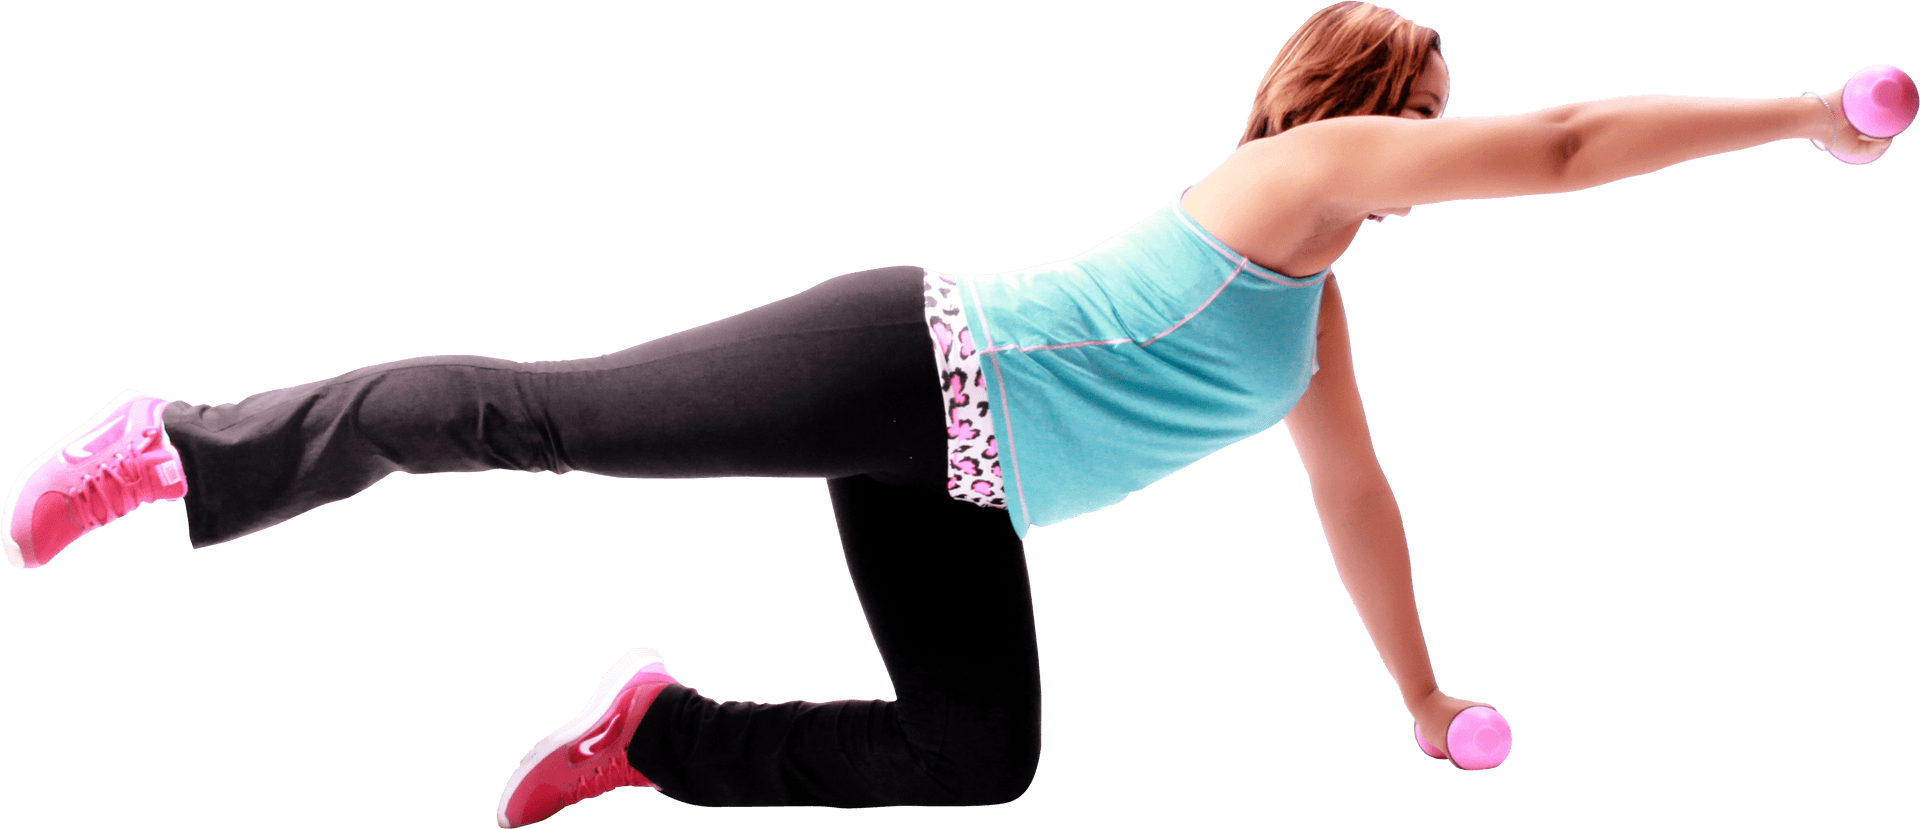 Pilates Exercisewith Dumbbells PNG